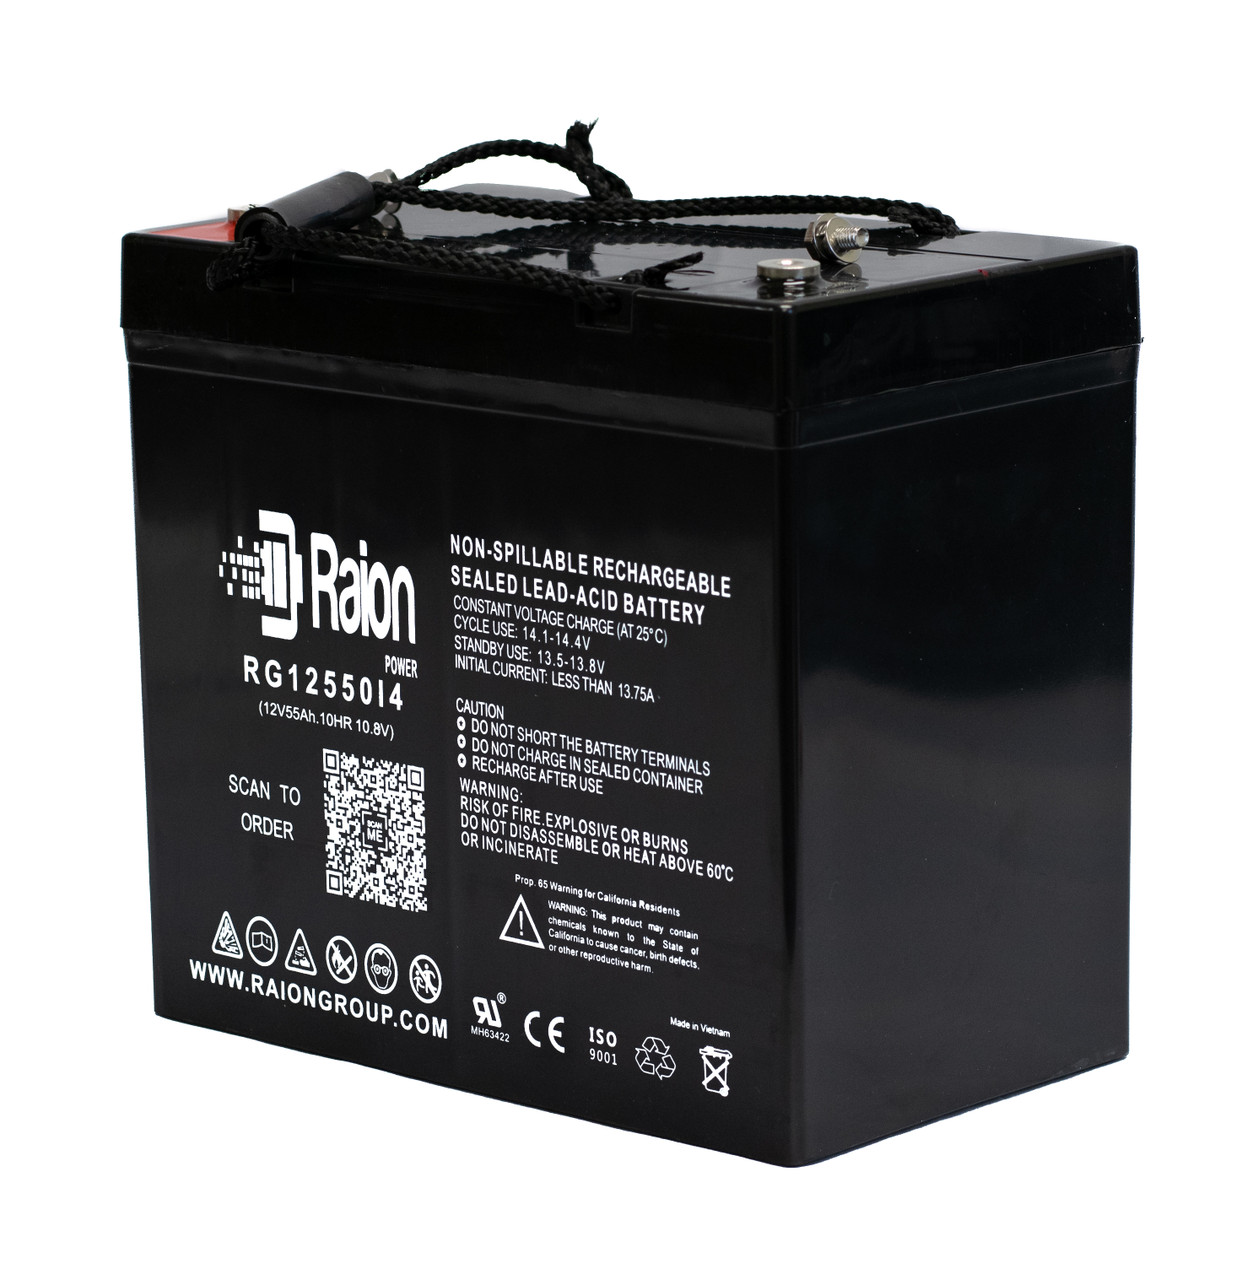 Raion Power 12V 55Ah 22NF Mobility Scooter Battery Replacement for Golden Technologies Compass GP600 CC